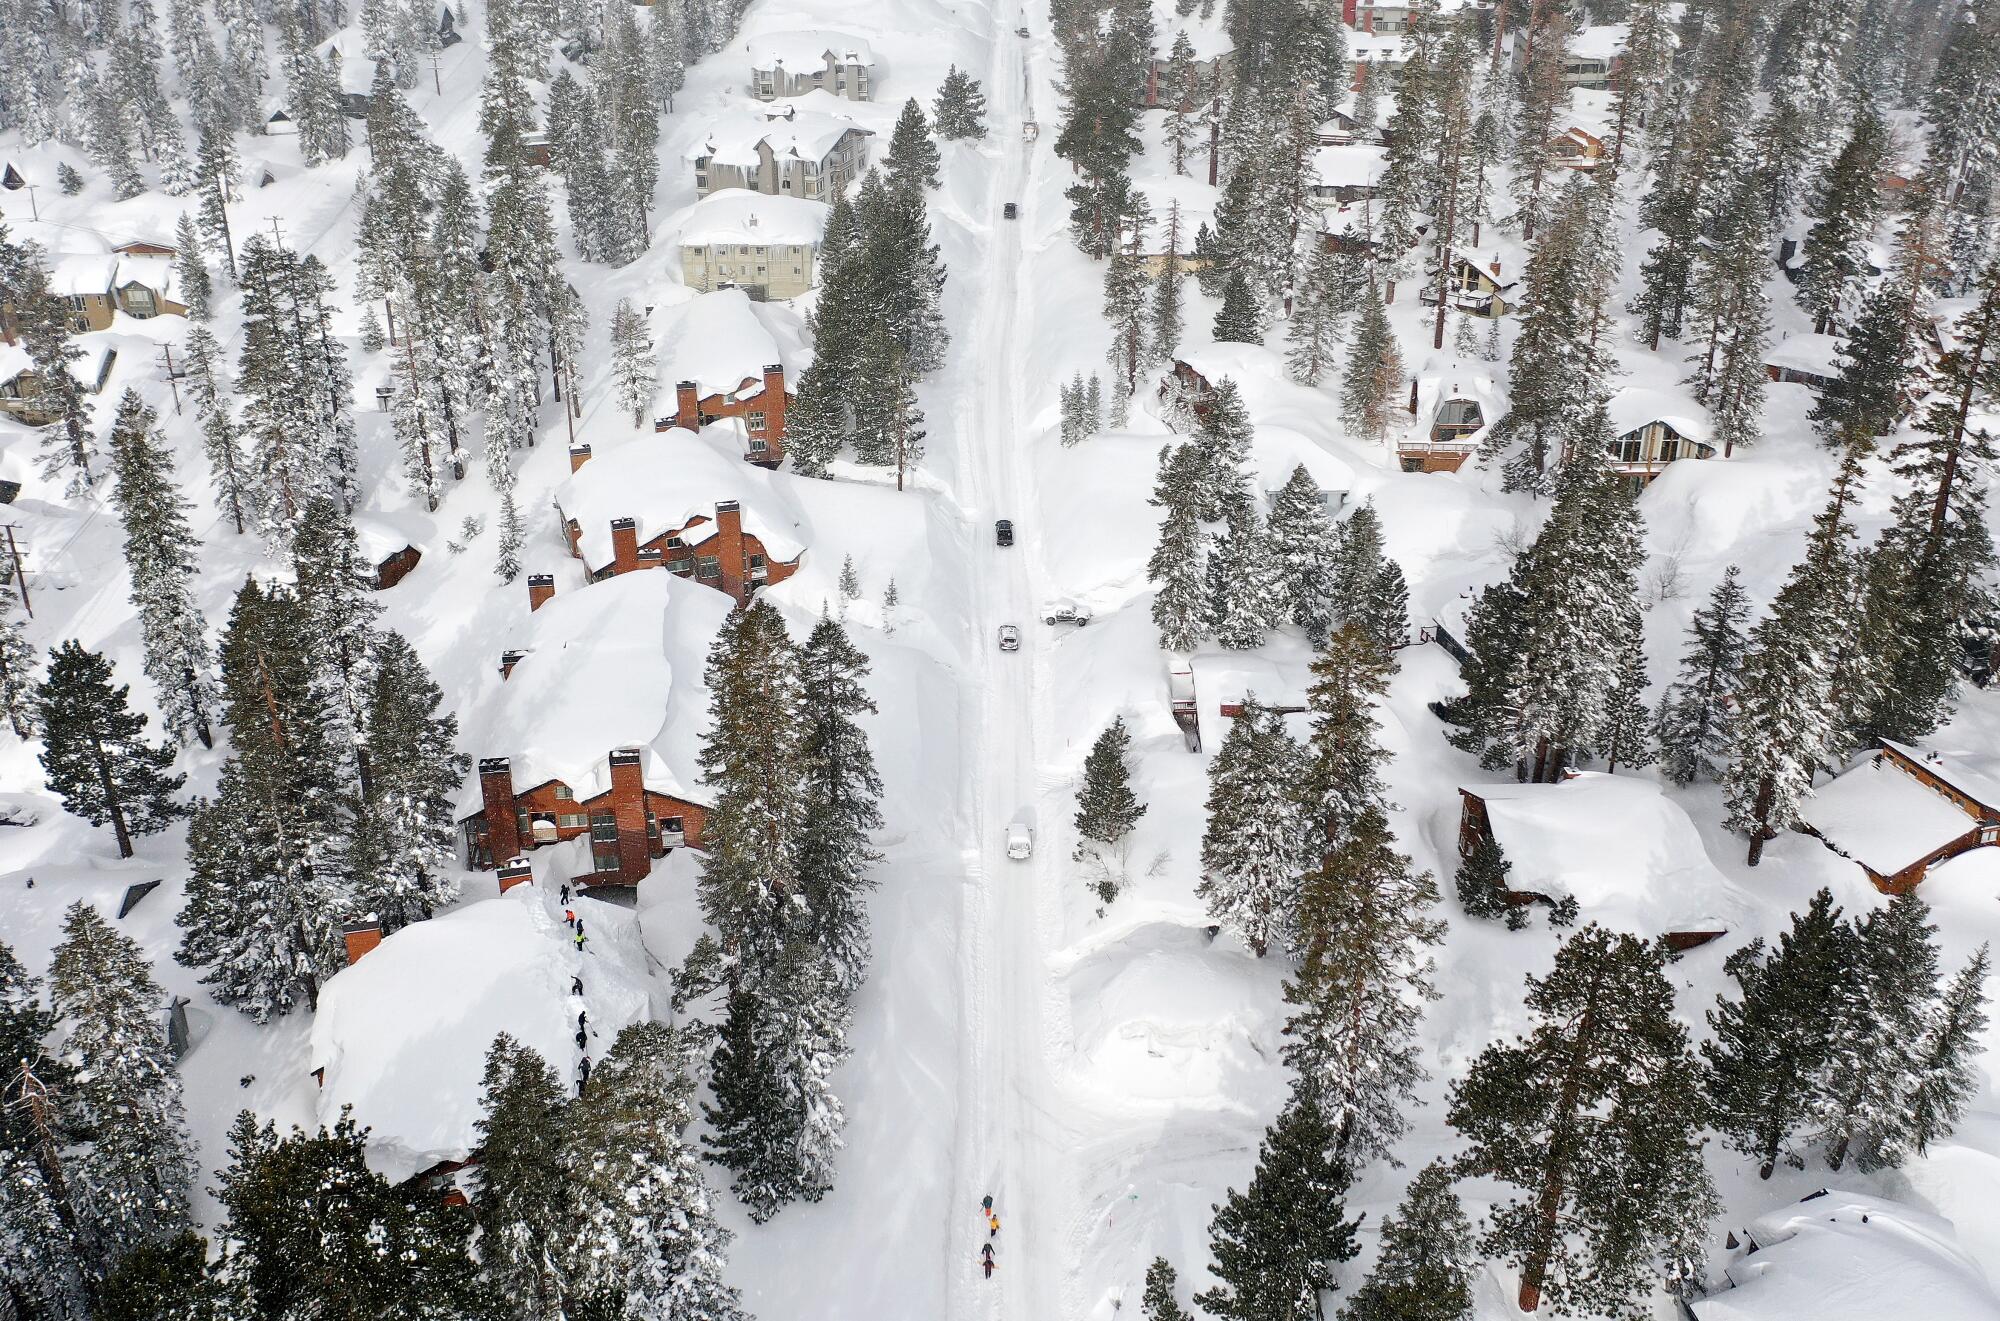 March 29 aerial view in Mammoth Lakes.